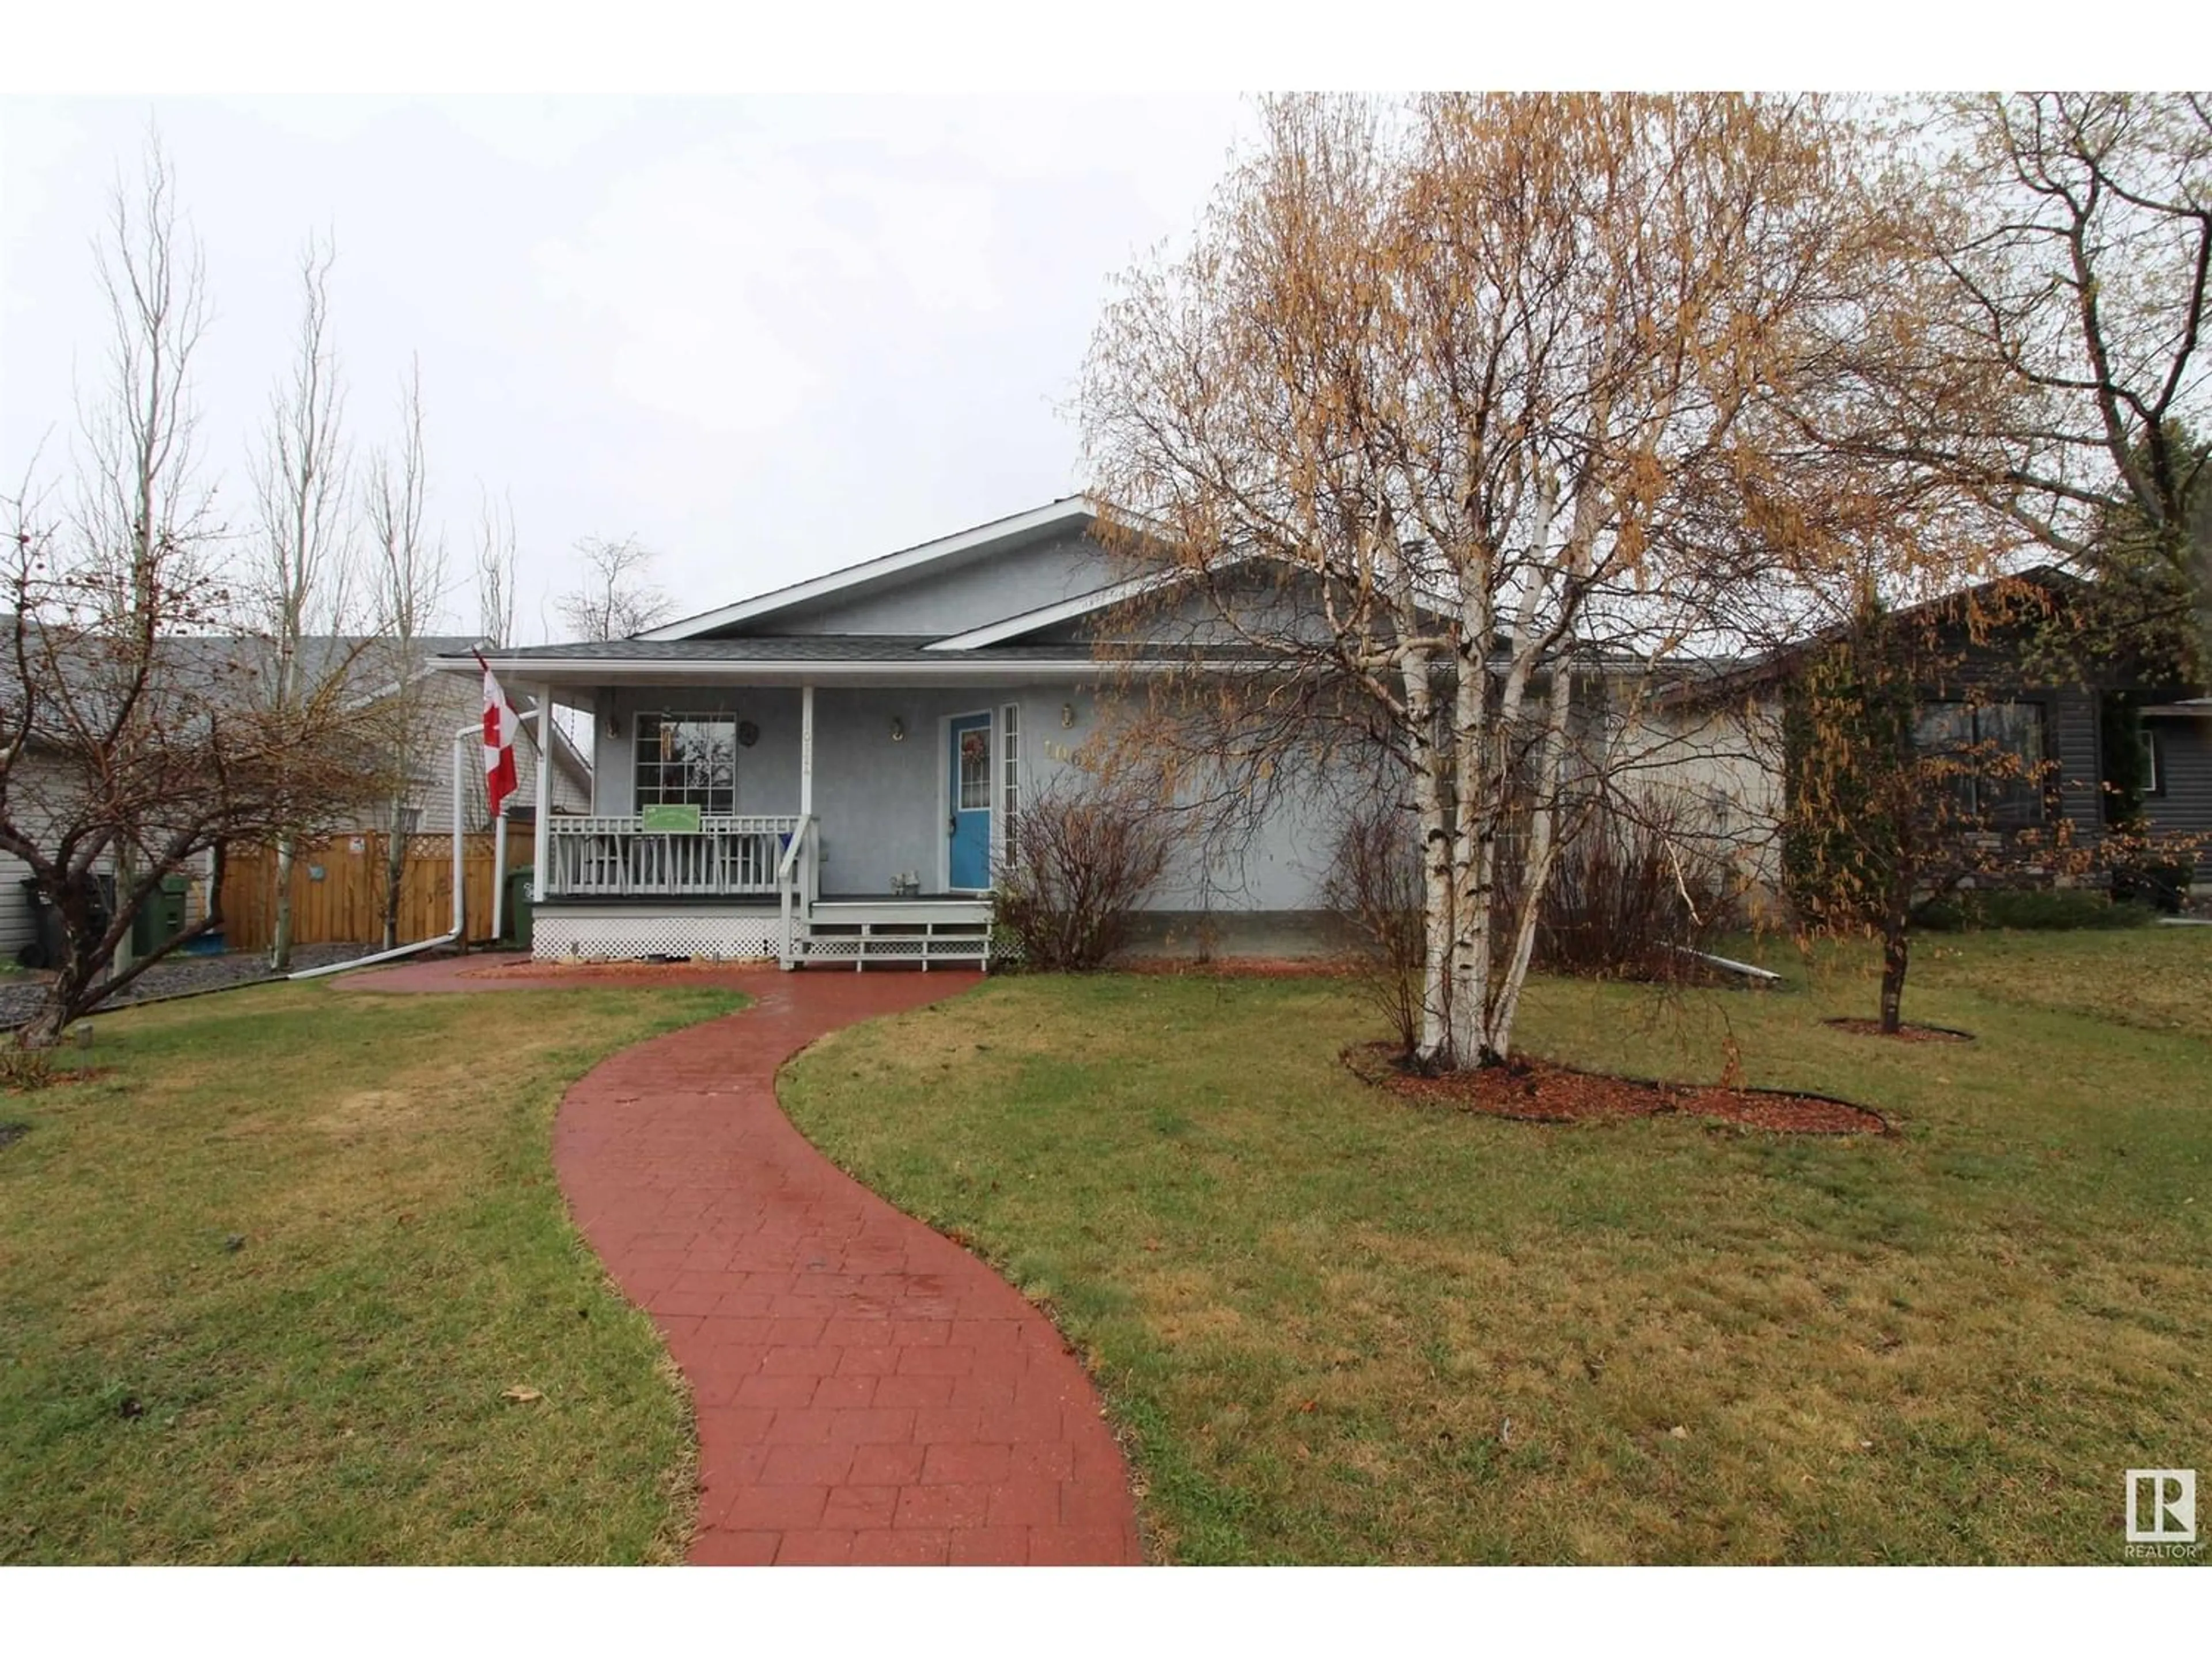 Frontside or backside of a home for 10624 110 ST, Westlock Alberta T7P1A2